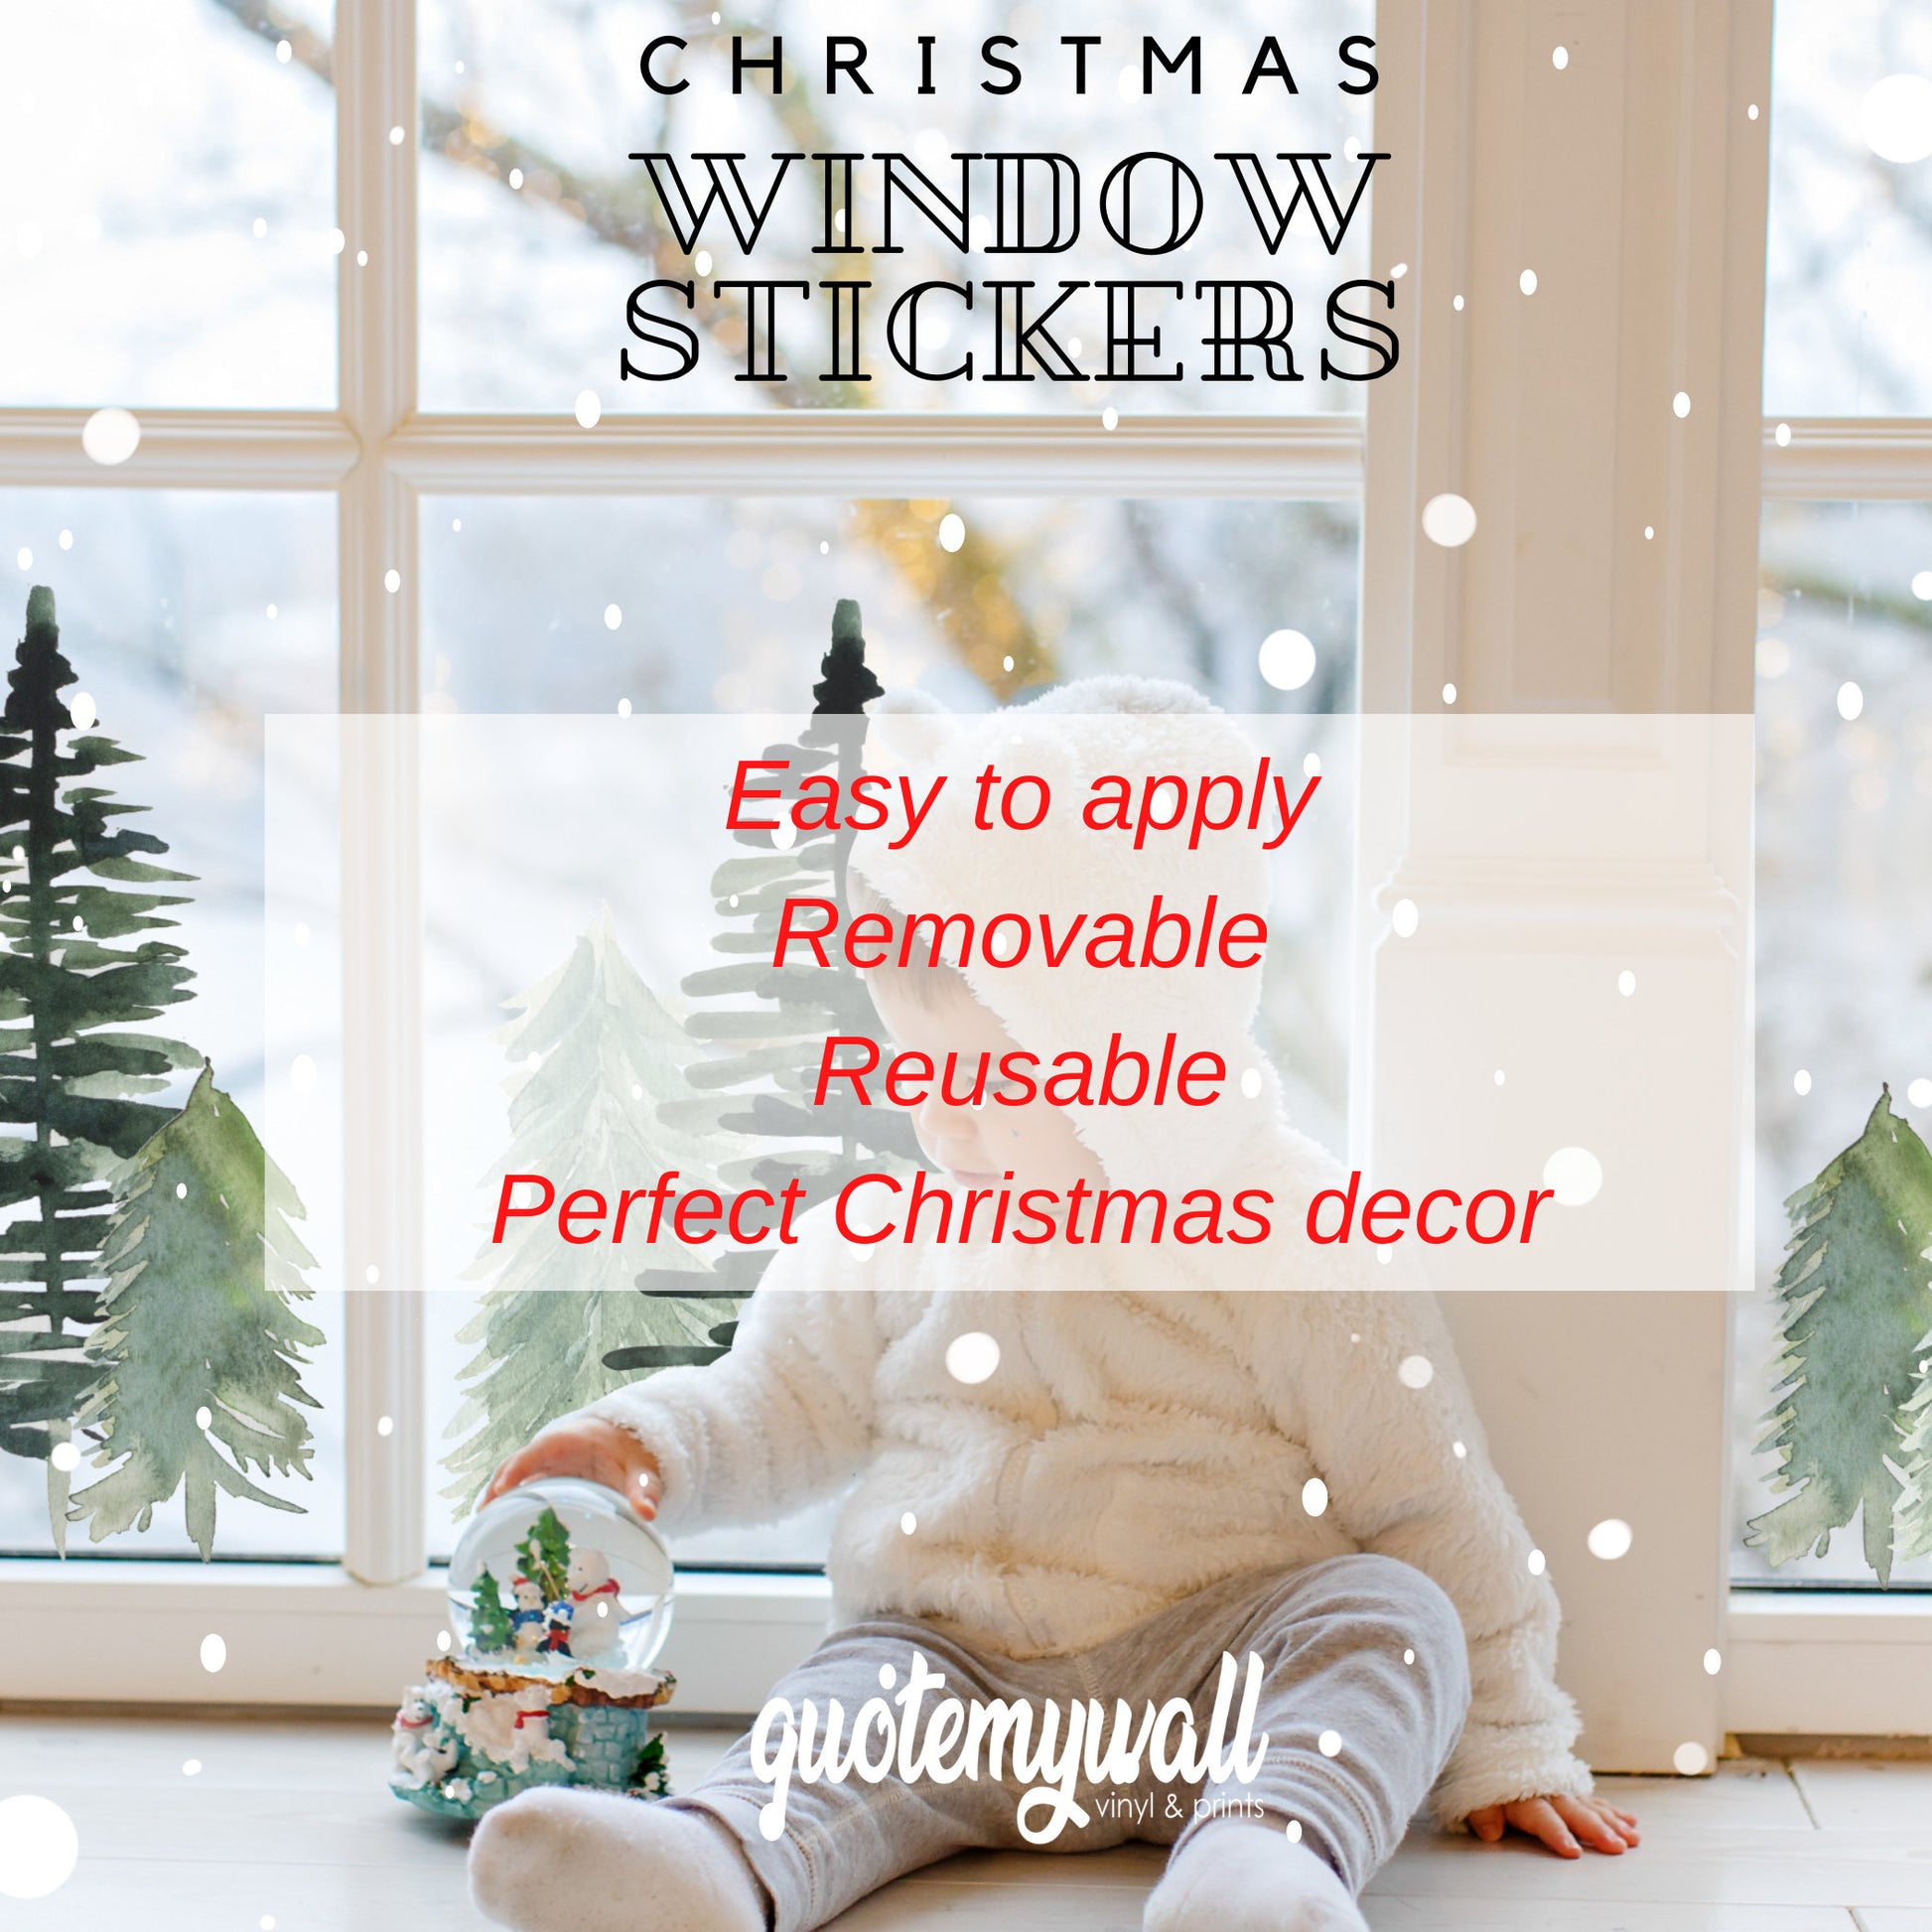 90 Mini Christmas Window Stickers, Christmas Trees Snowflakes & Dots, Xmas Window Decals For Home Shop Window